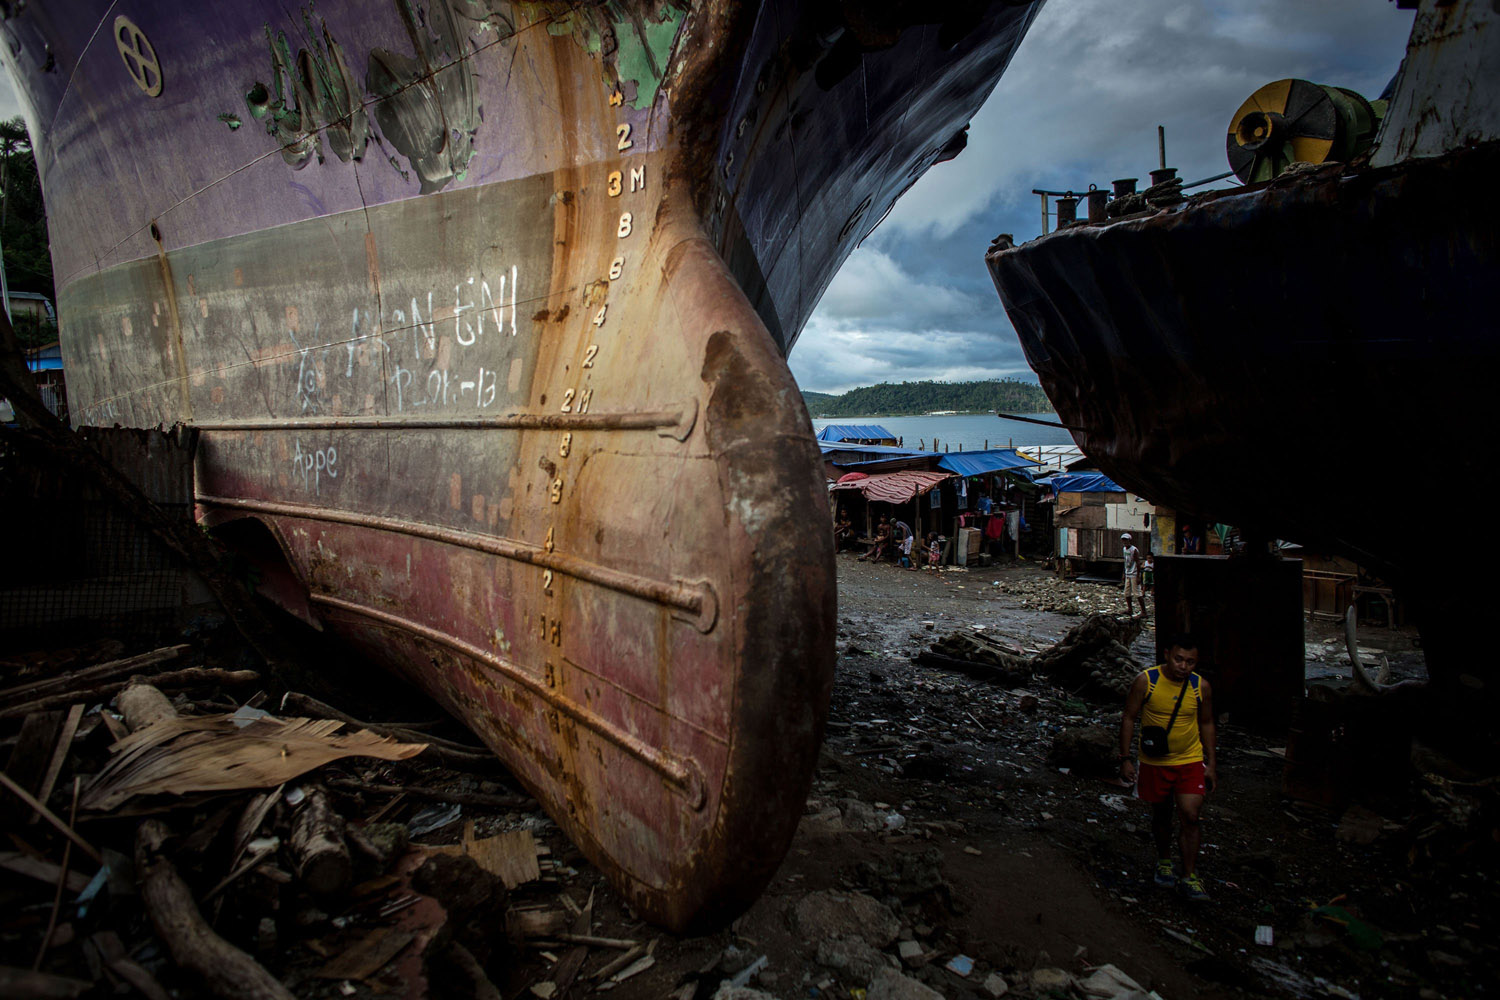 Apr. 18, 2014. A man walks through a gap between three large ships that were grounded by Typhoon Haiyan in Tacloban, Leyte, Philippines. People continue to rebuild their lives five months after Typhoon Haiyan struck the coast  on November 8, 2013, leaving more than 6000 dead and many more homeless.